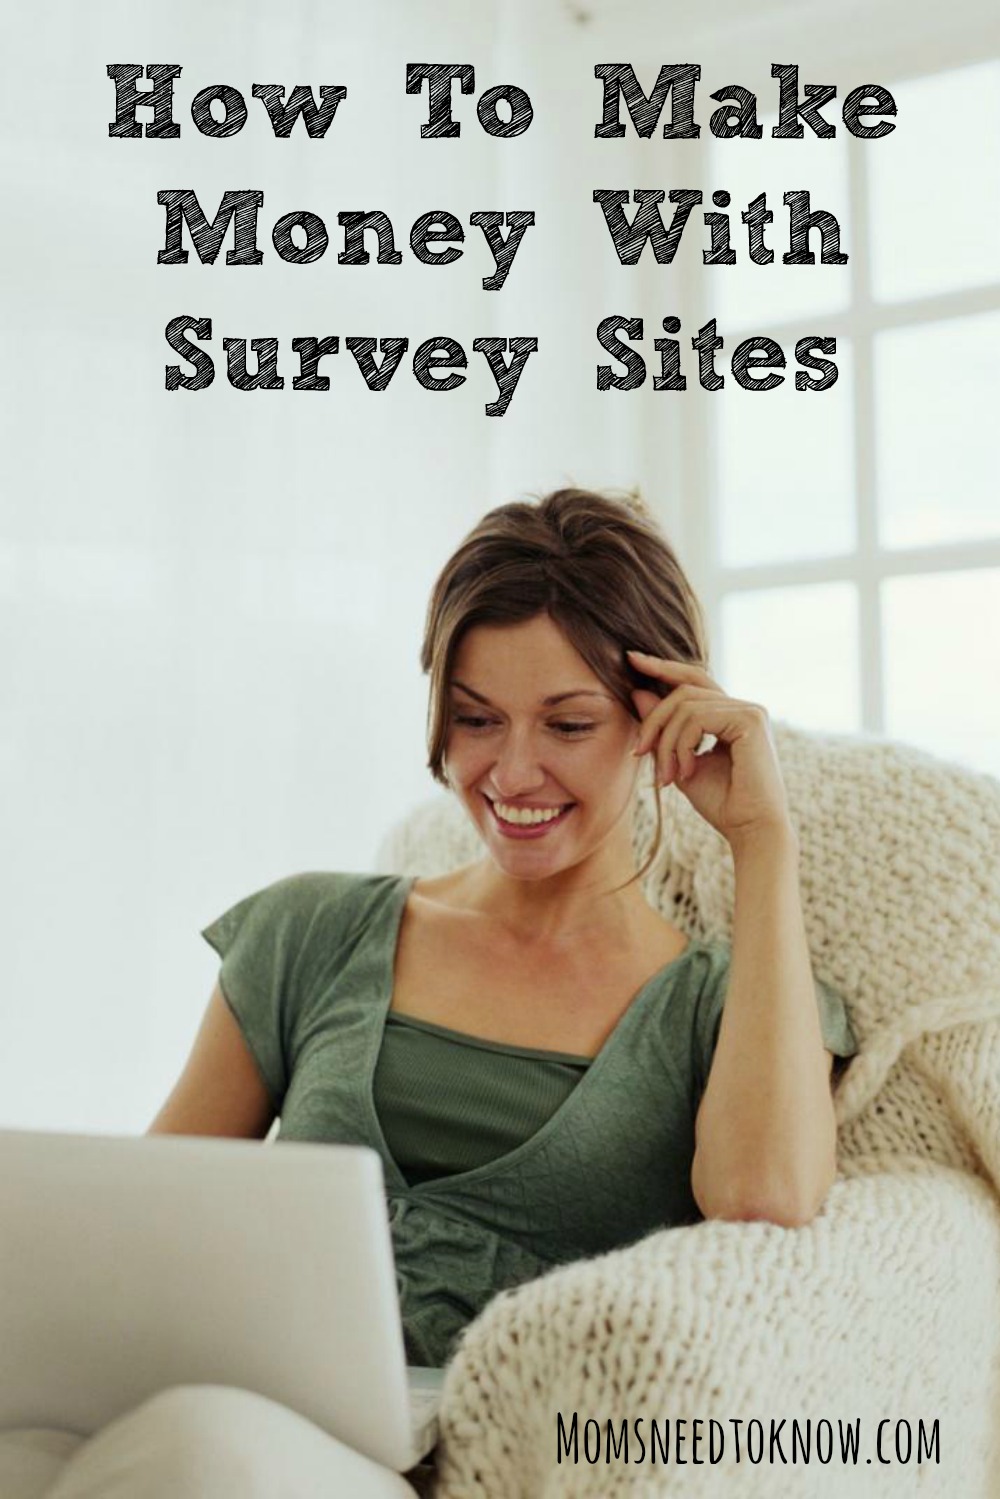 If you are looking to add more income to your household budget, you can easily make money with survey sites! These are the best companies to try.